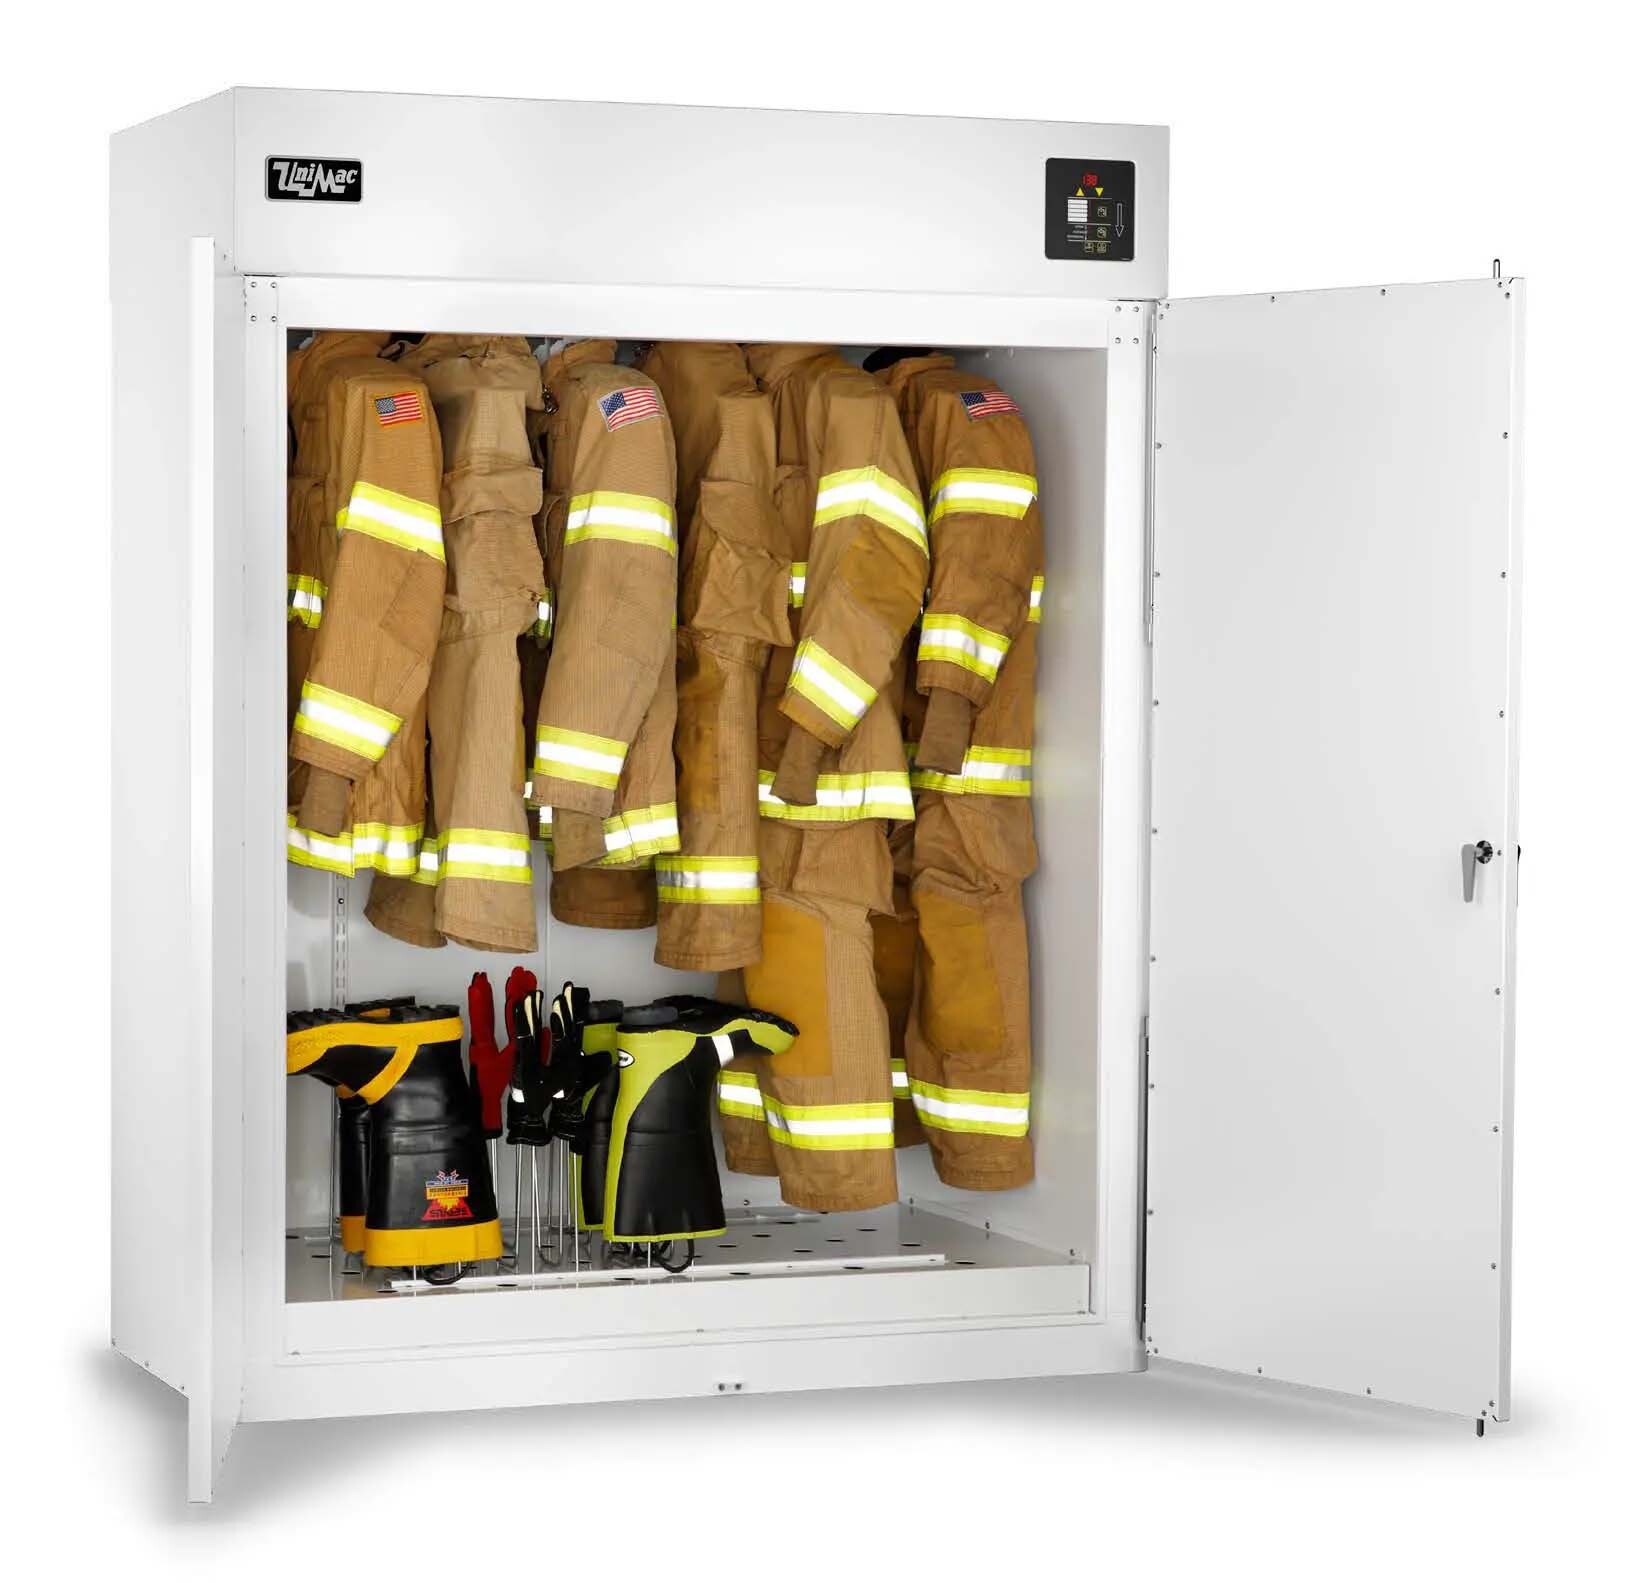 Unimac PPE Drying cabinet